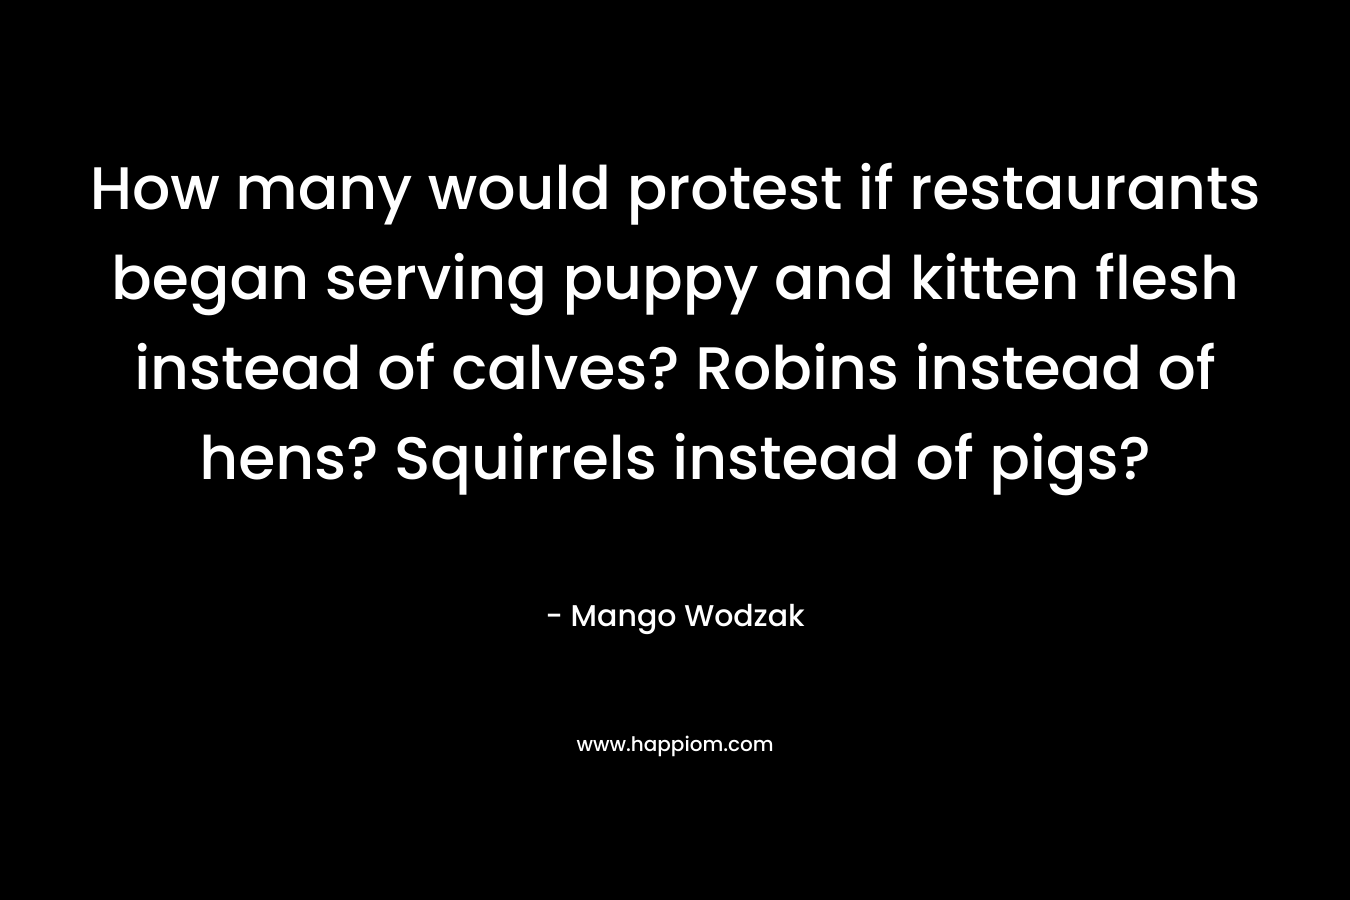 How many would protest if restaurants began serving puppy and kitten flesh instead of calves? Robins instead of hens? Squirrels instead of pigs? – Mango Wodzak